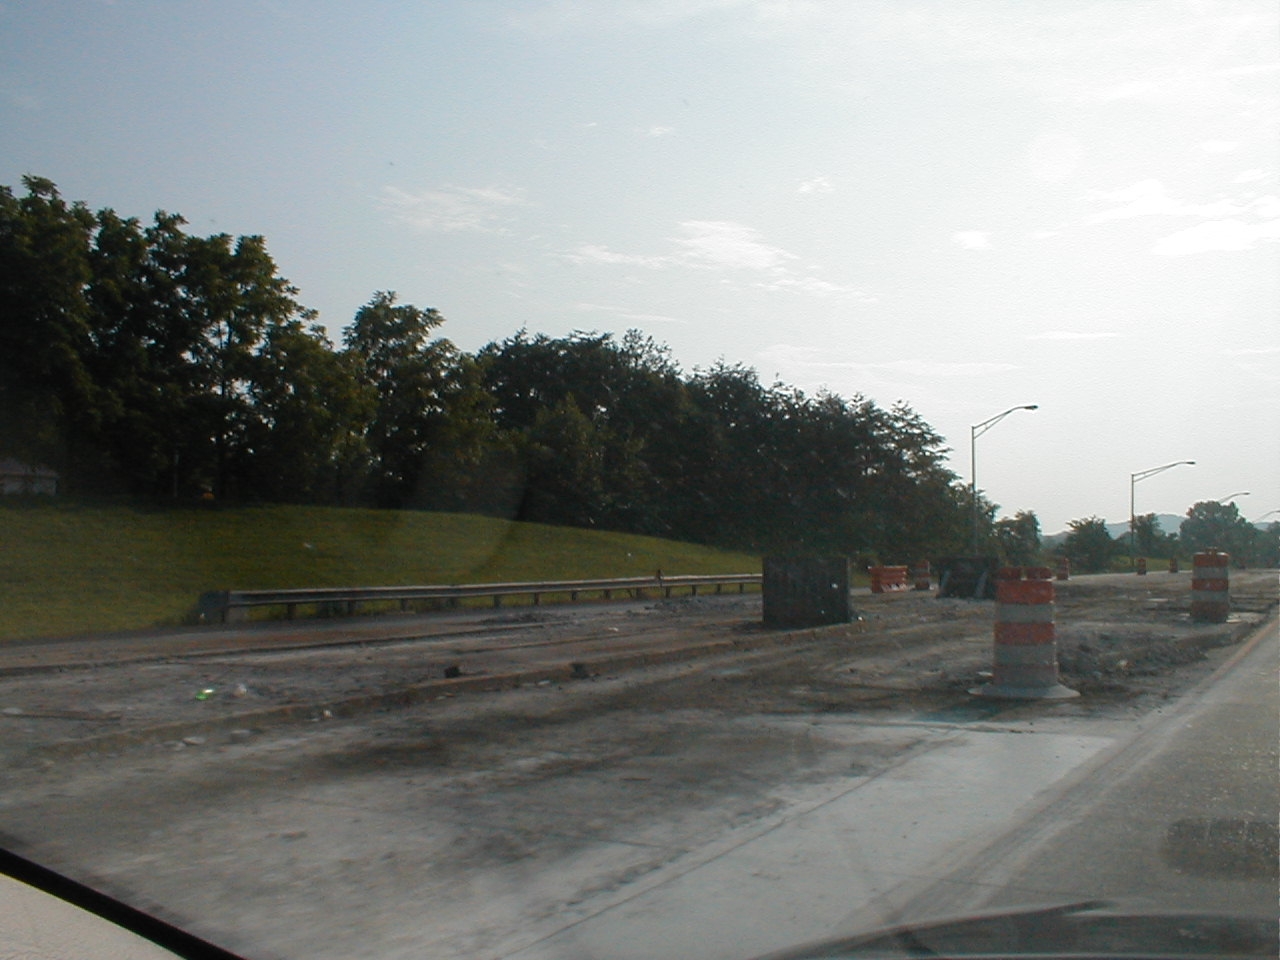 The structures at the former London toll are being removed and a new roadway is being prepared.